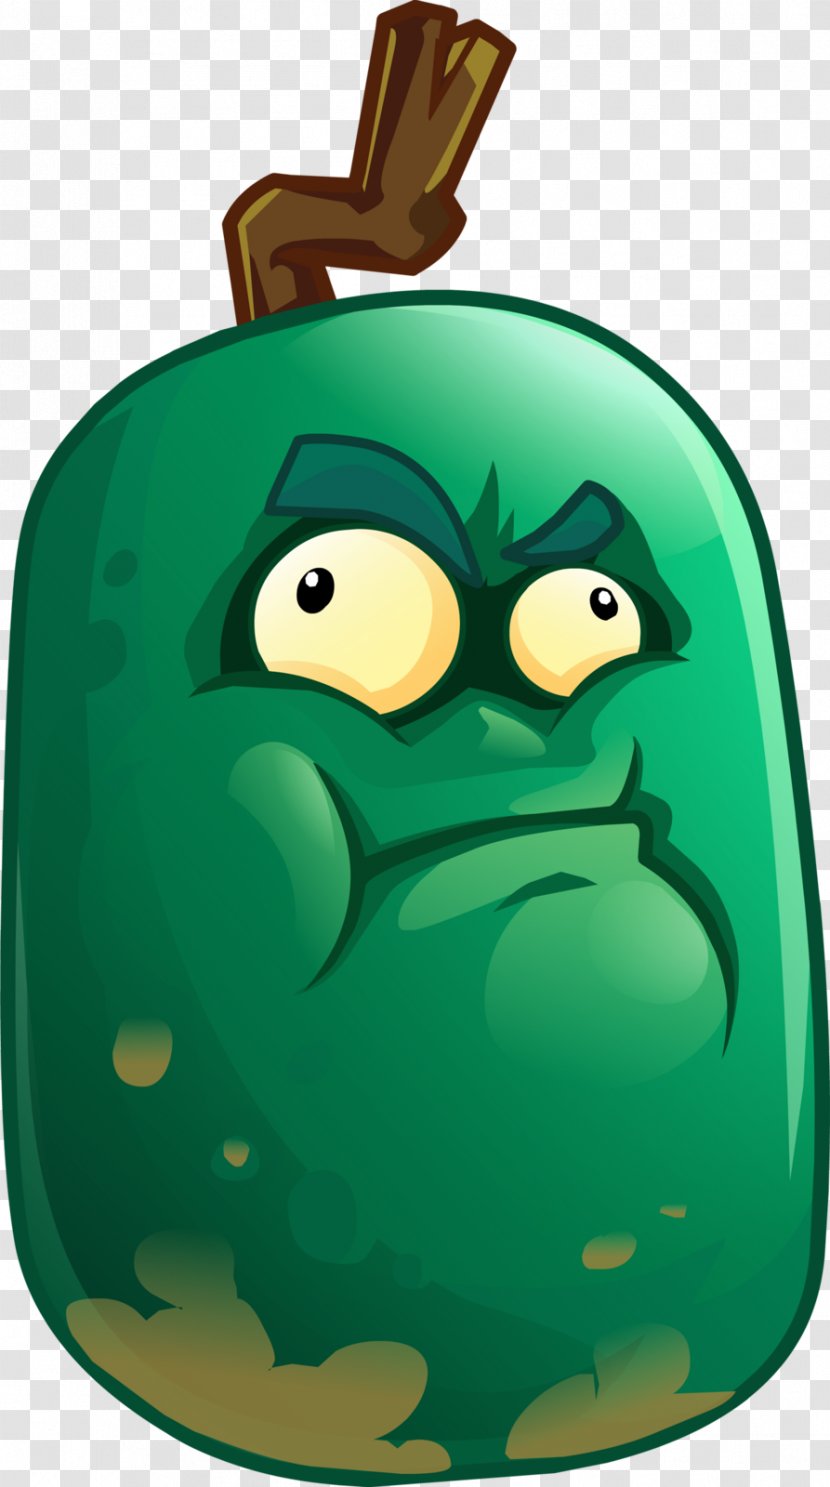 Plants Vs. Zombies 2: Its About Time Cartoon Winter Melon Punch Wax Gourd - Bird Transparent PNG